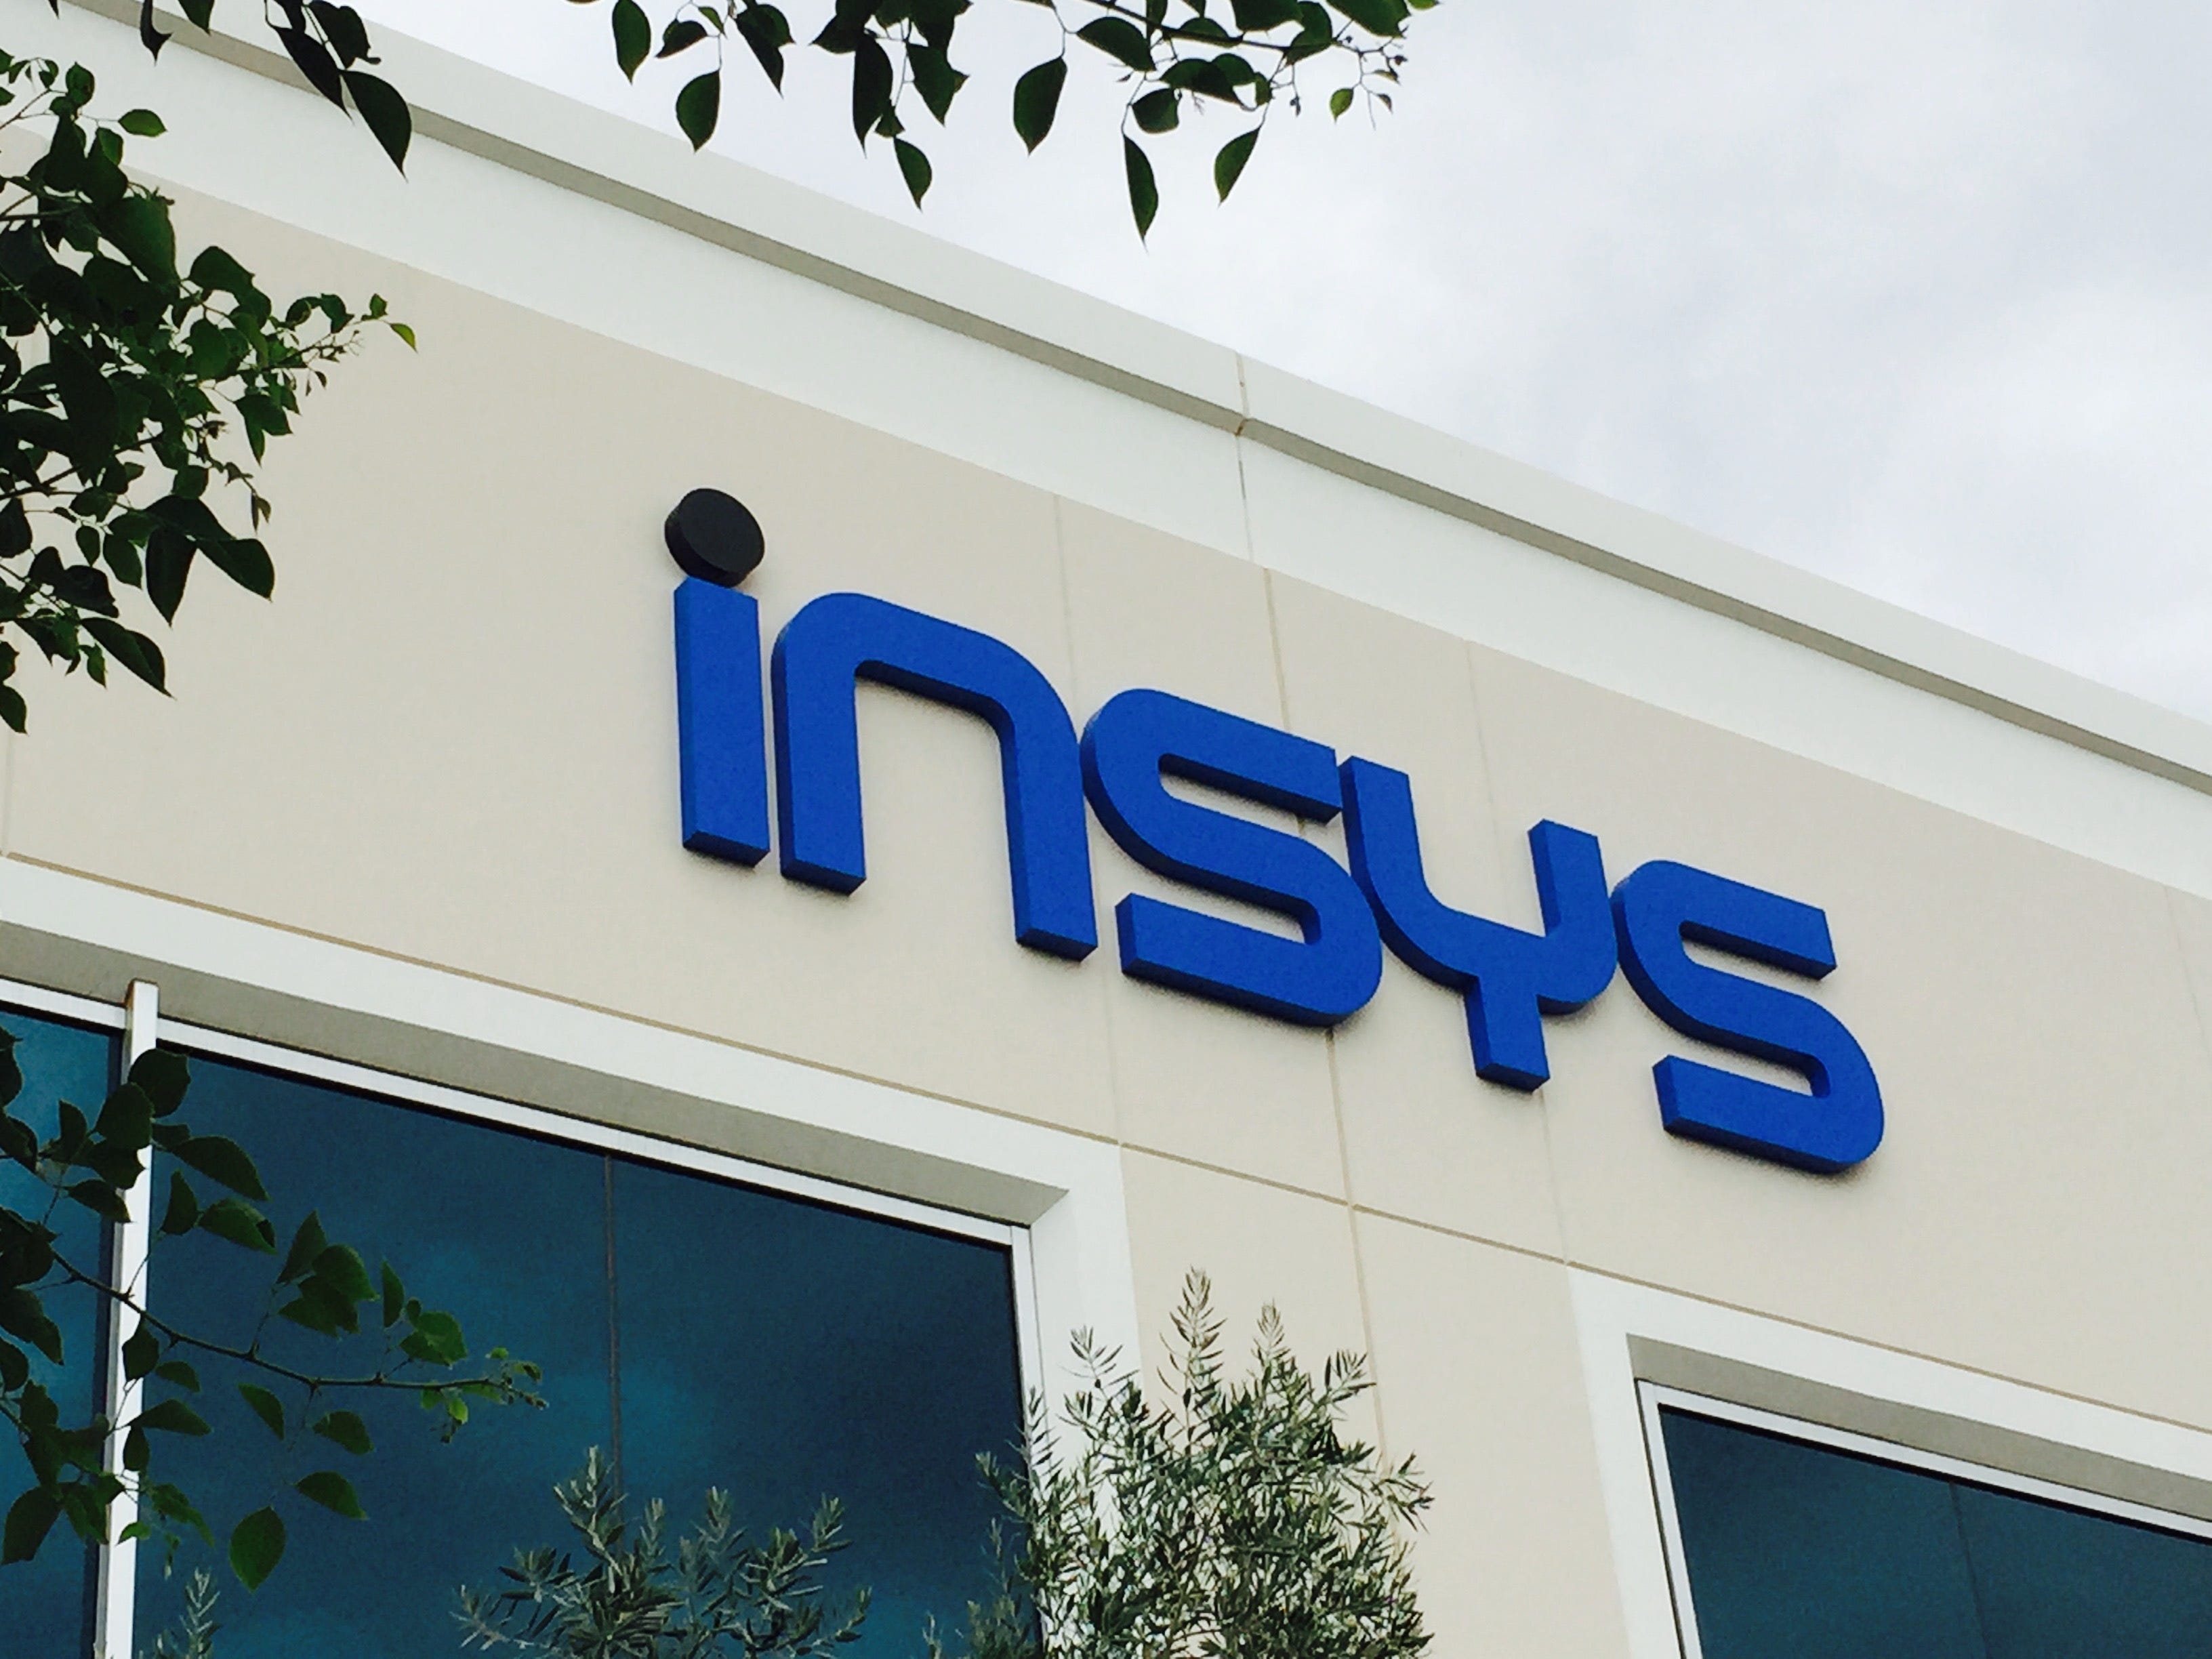 Insys-paid doctor can't practice amid questions about opioid prescriptions